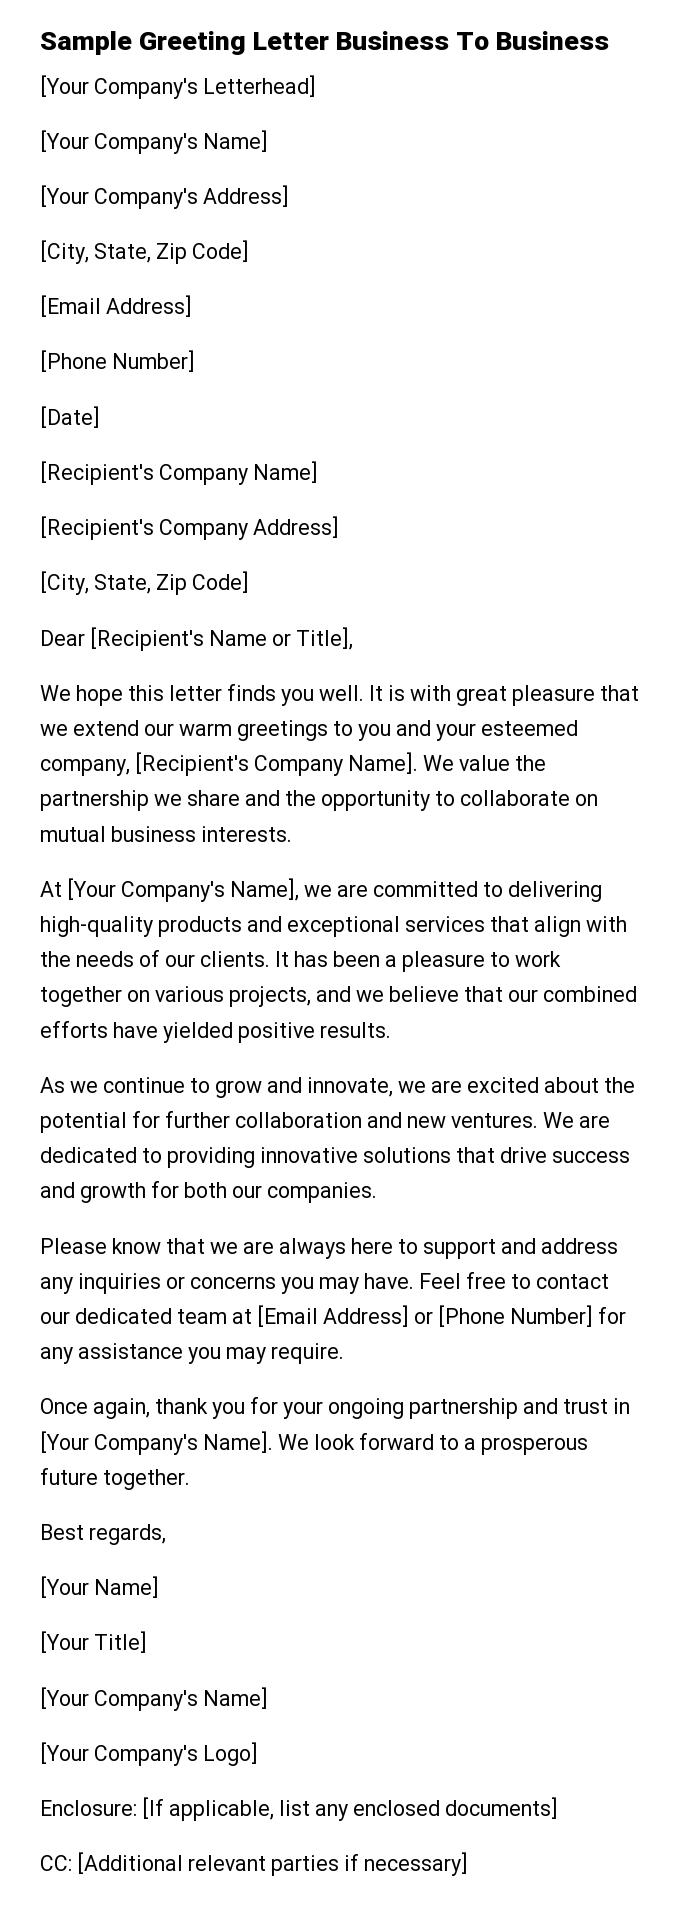 Sample Greeting Letter Business To Business